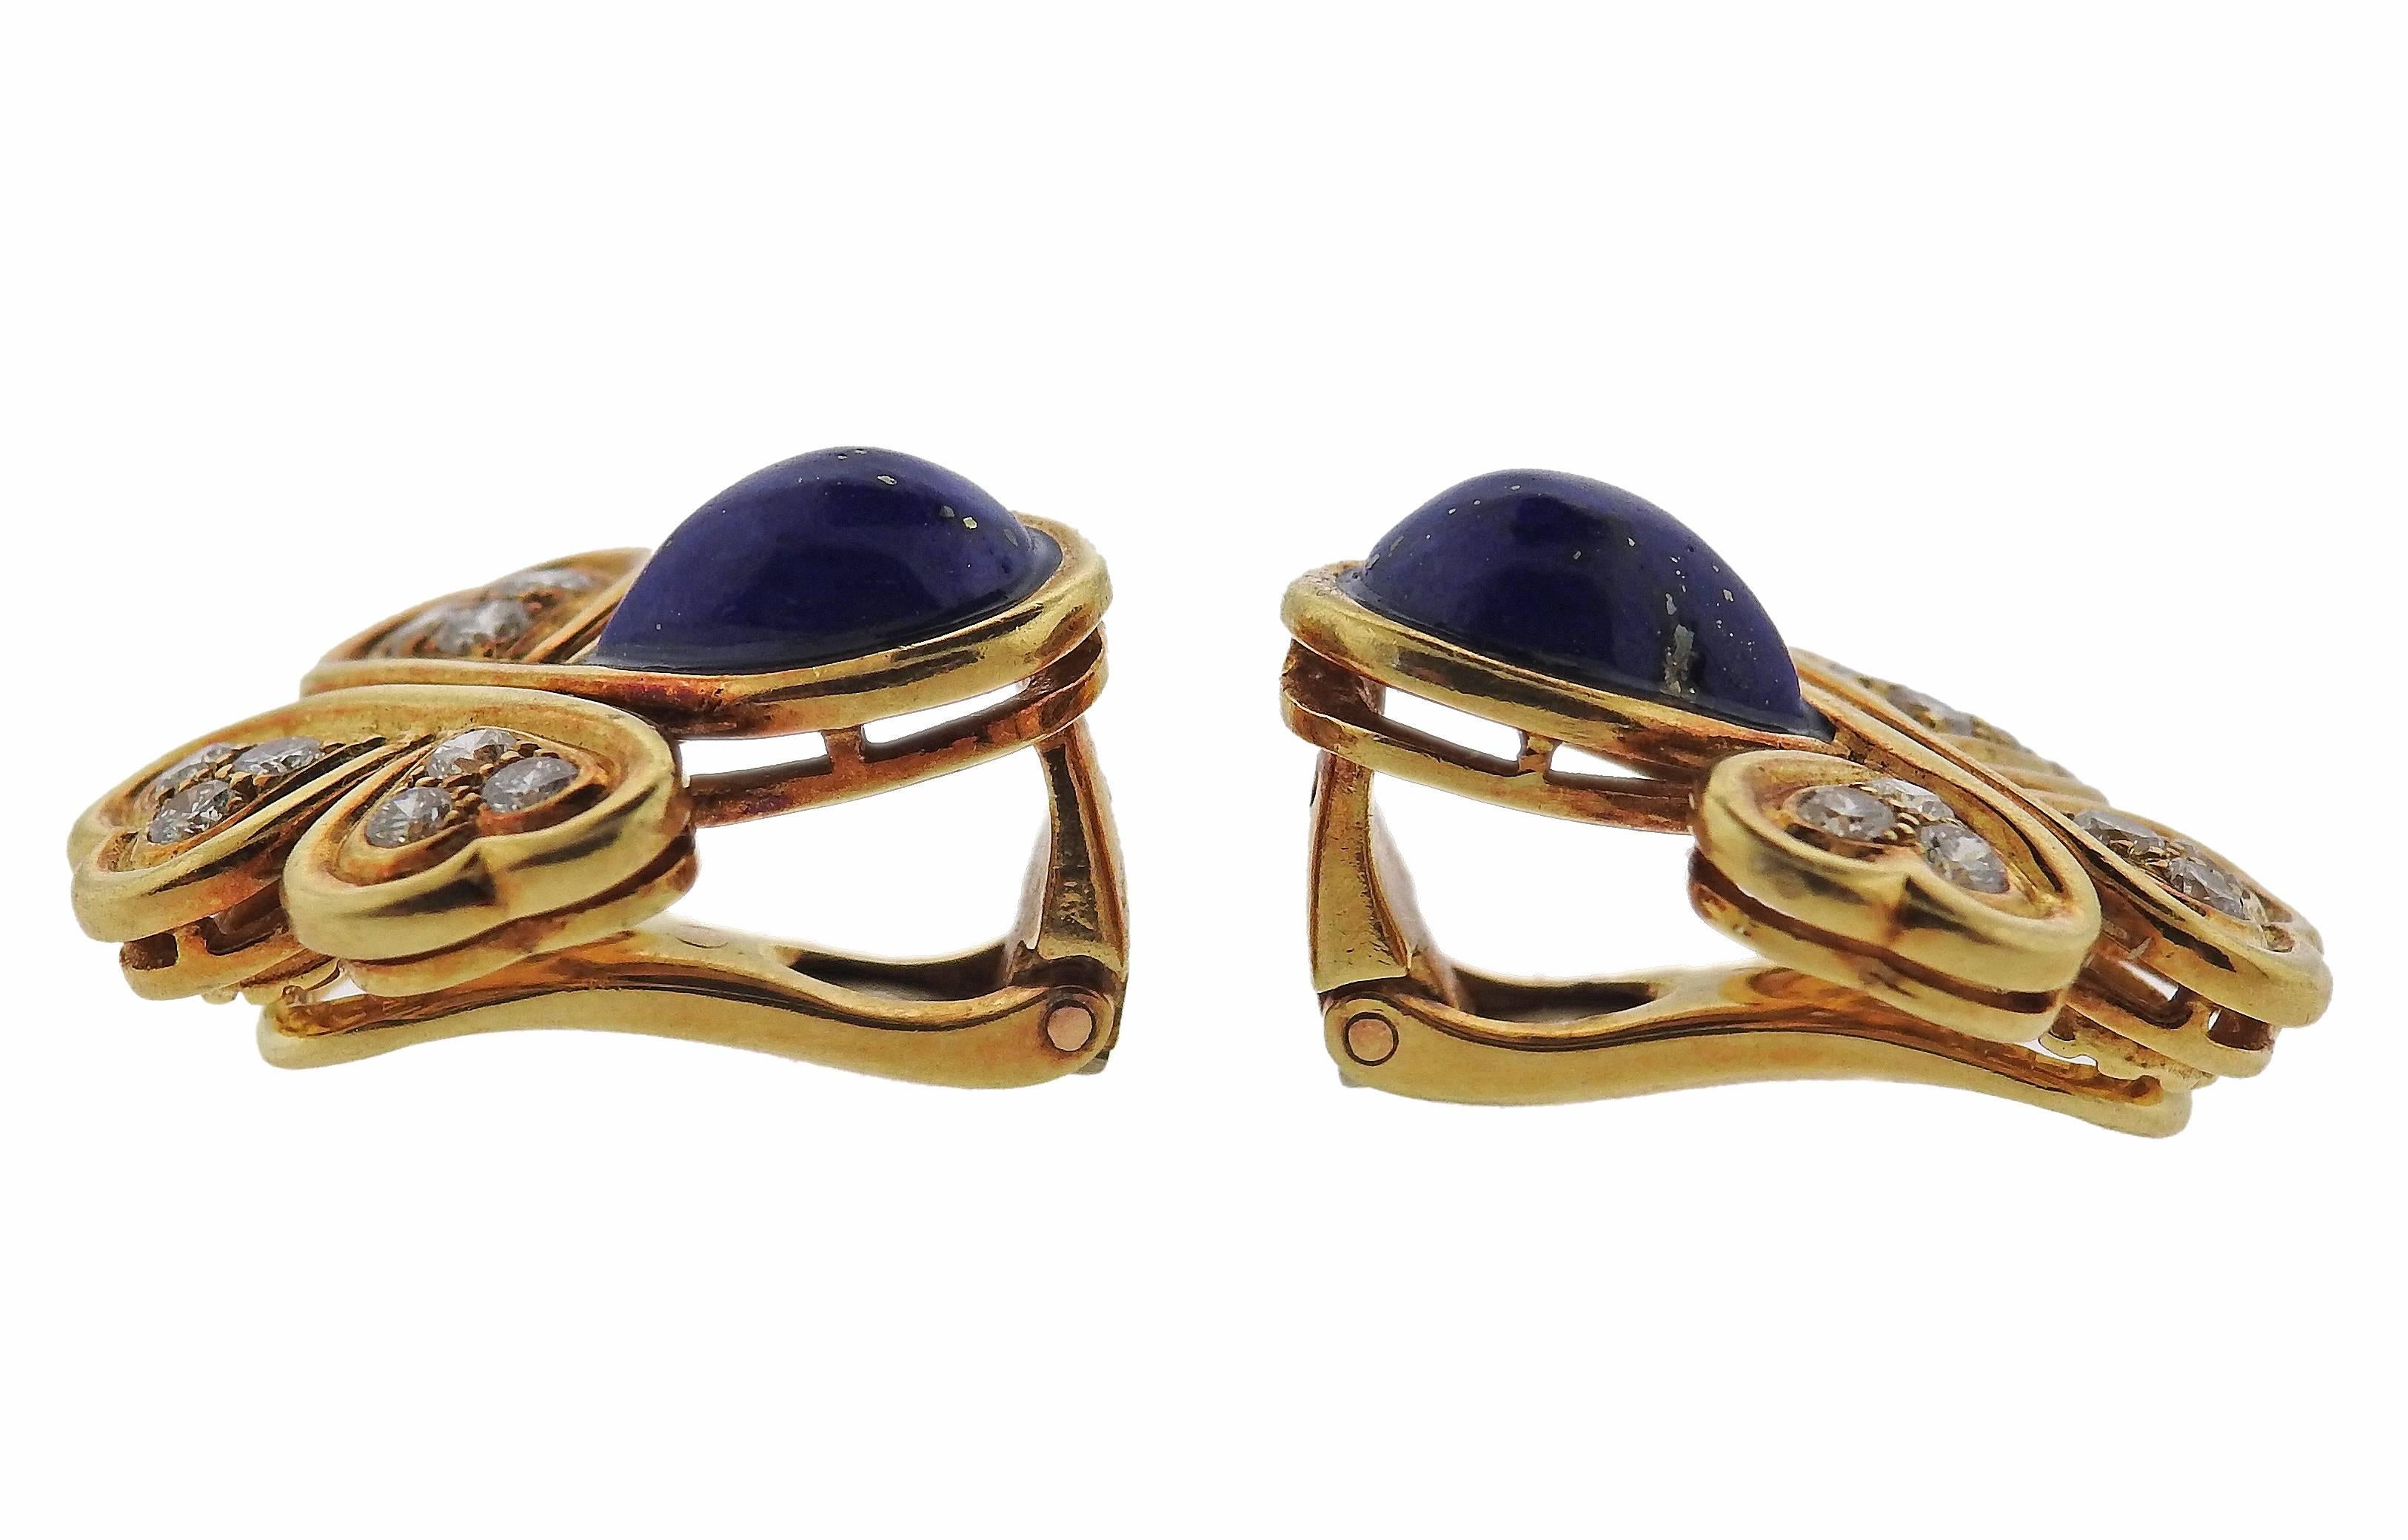 A pair of 18k gold diamond lapis earrings crafted by Dior featuring lapis stones and approximately 0.36ctw in G/VS diamonds. Earrings measure 20mm X 17mm. Weight is 10 grams.